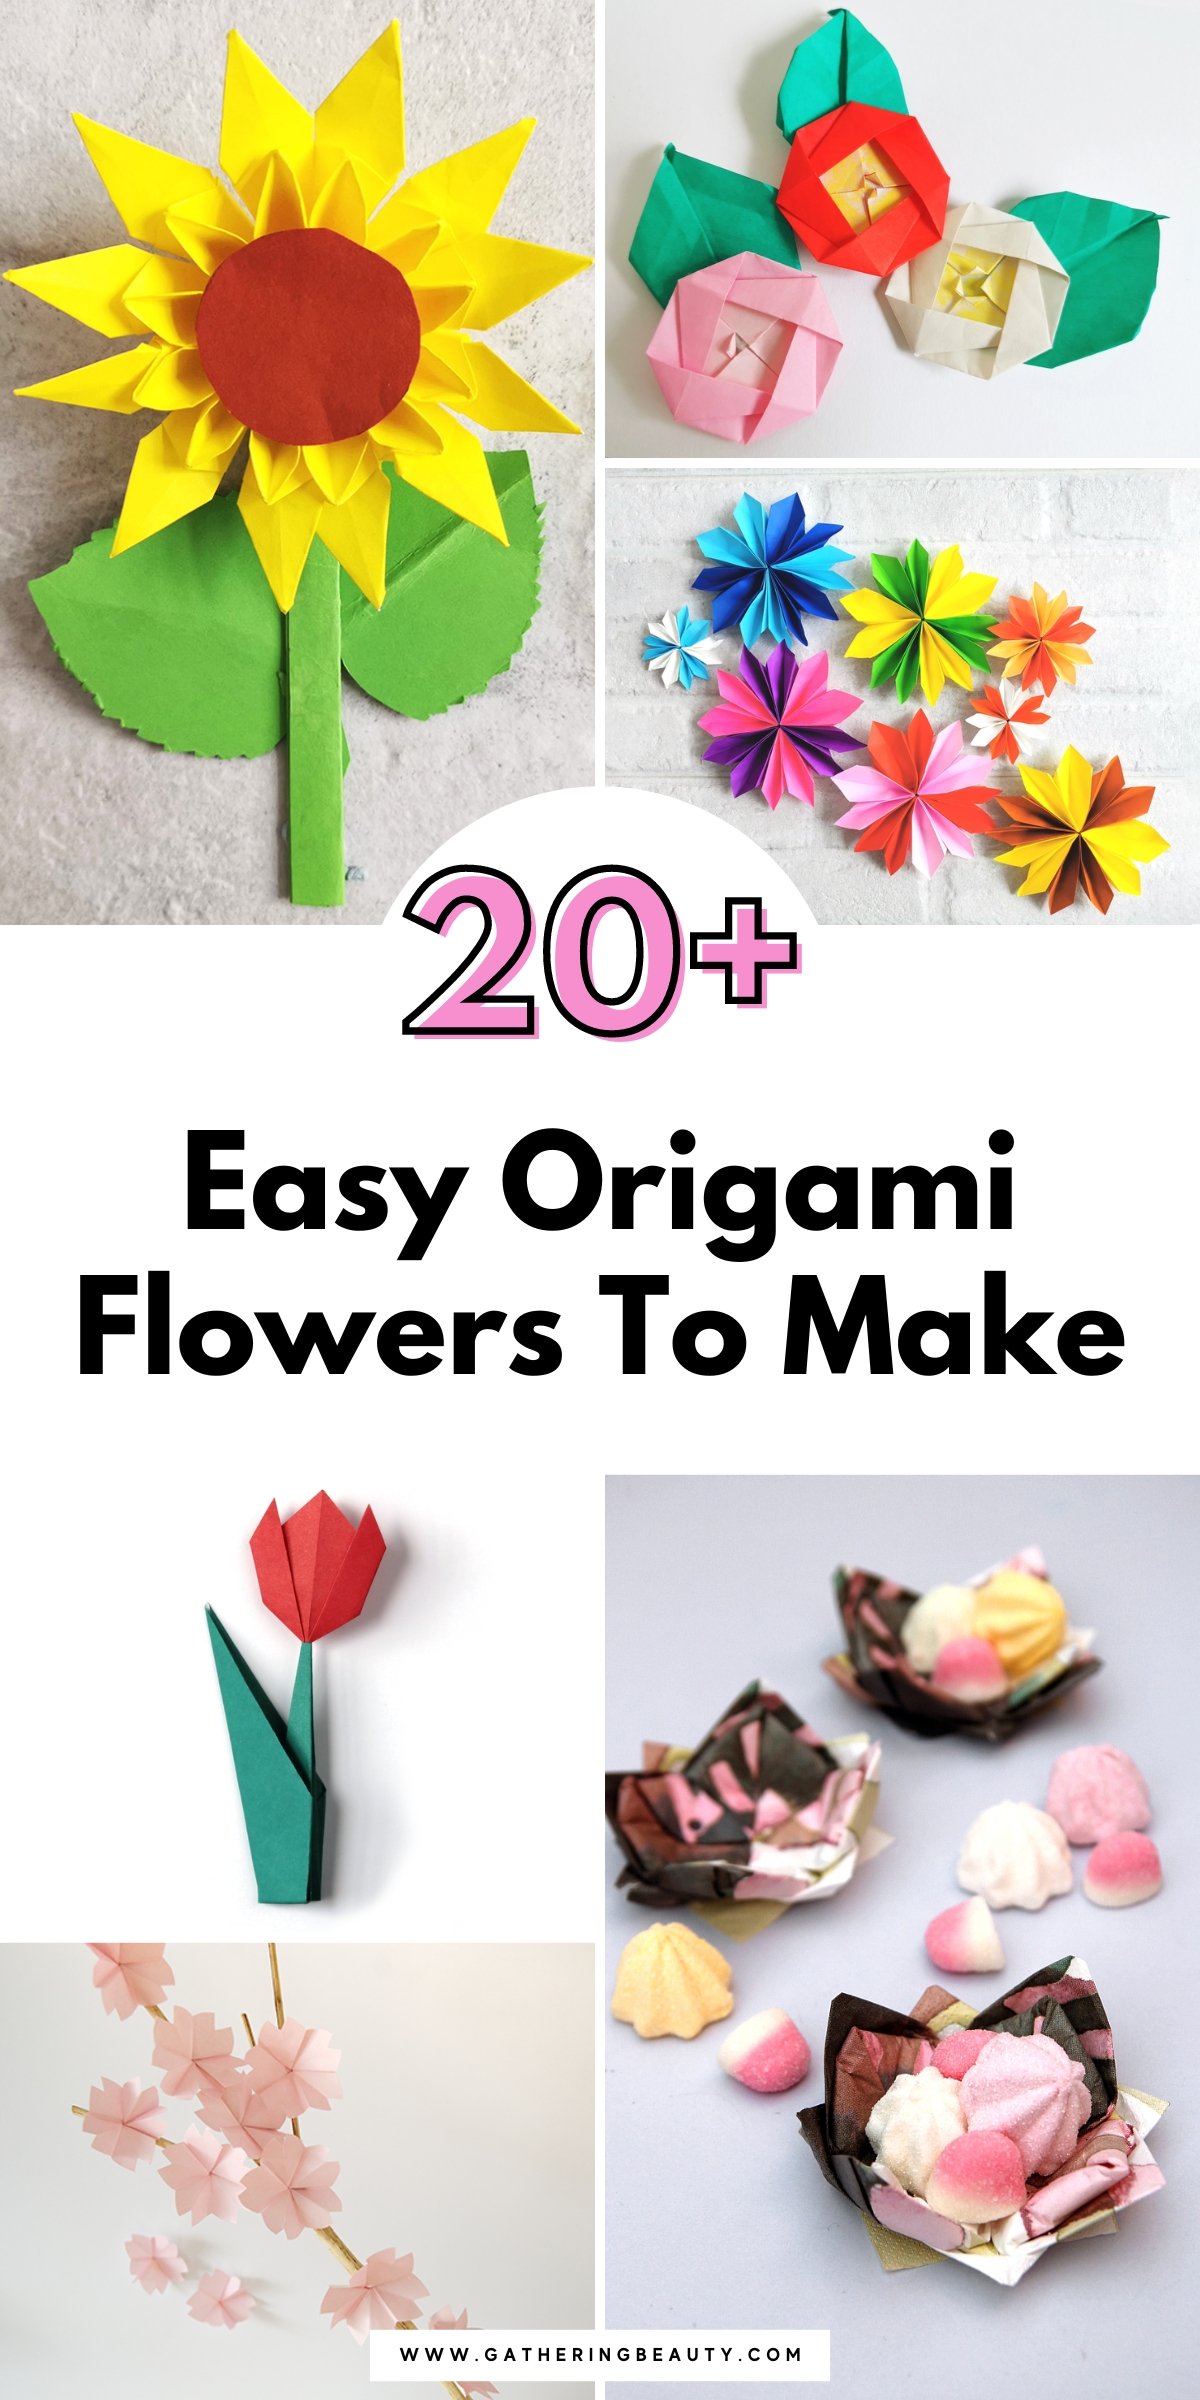 20+ Easy Origami Flowers To Make — Gathering Beauty